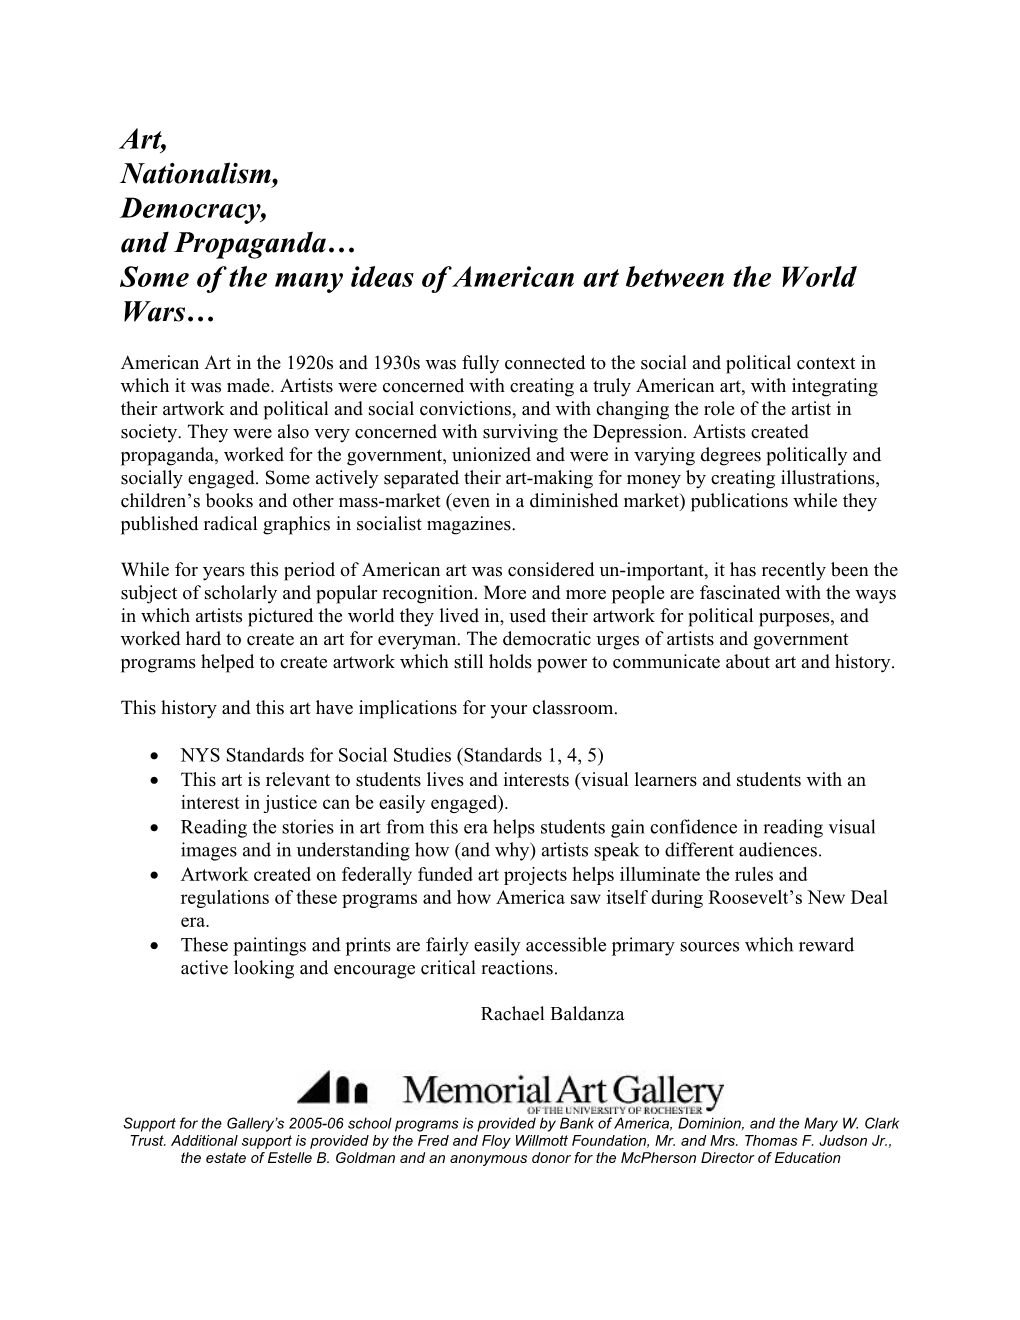 American Art in the 1920S and 1930S Was Fully Connected to the Social and Political Context in Which It Was Made